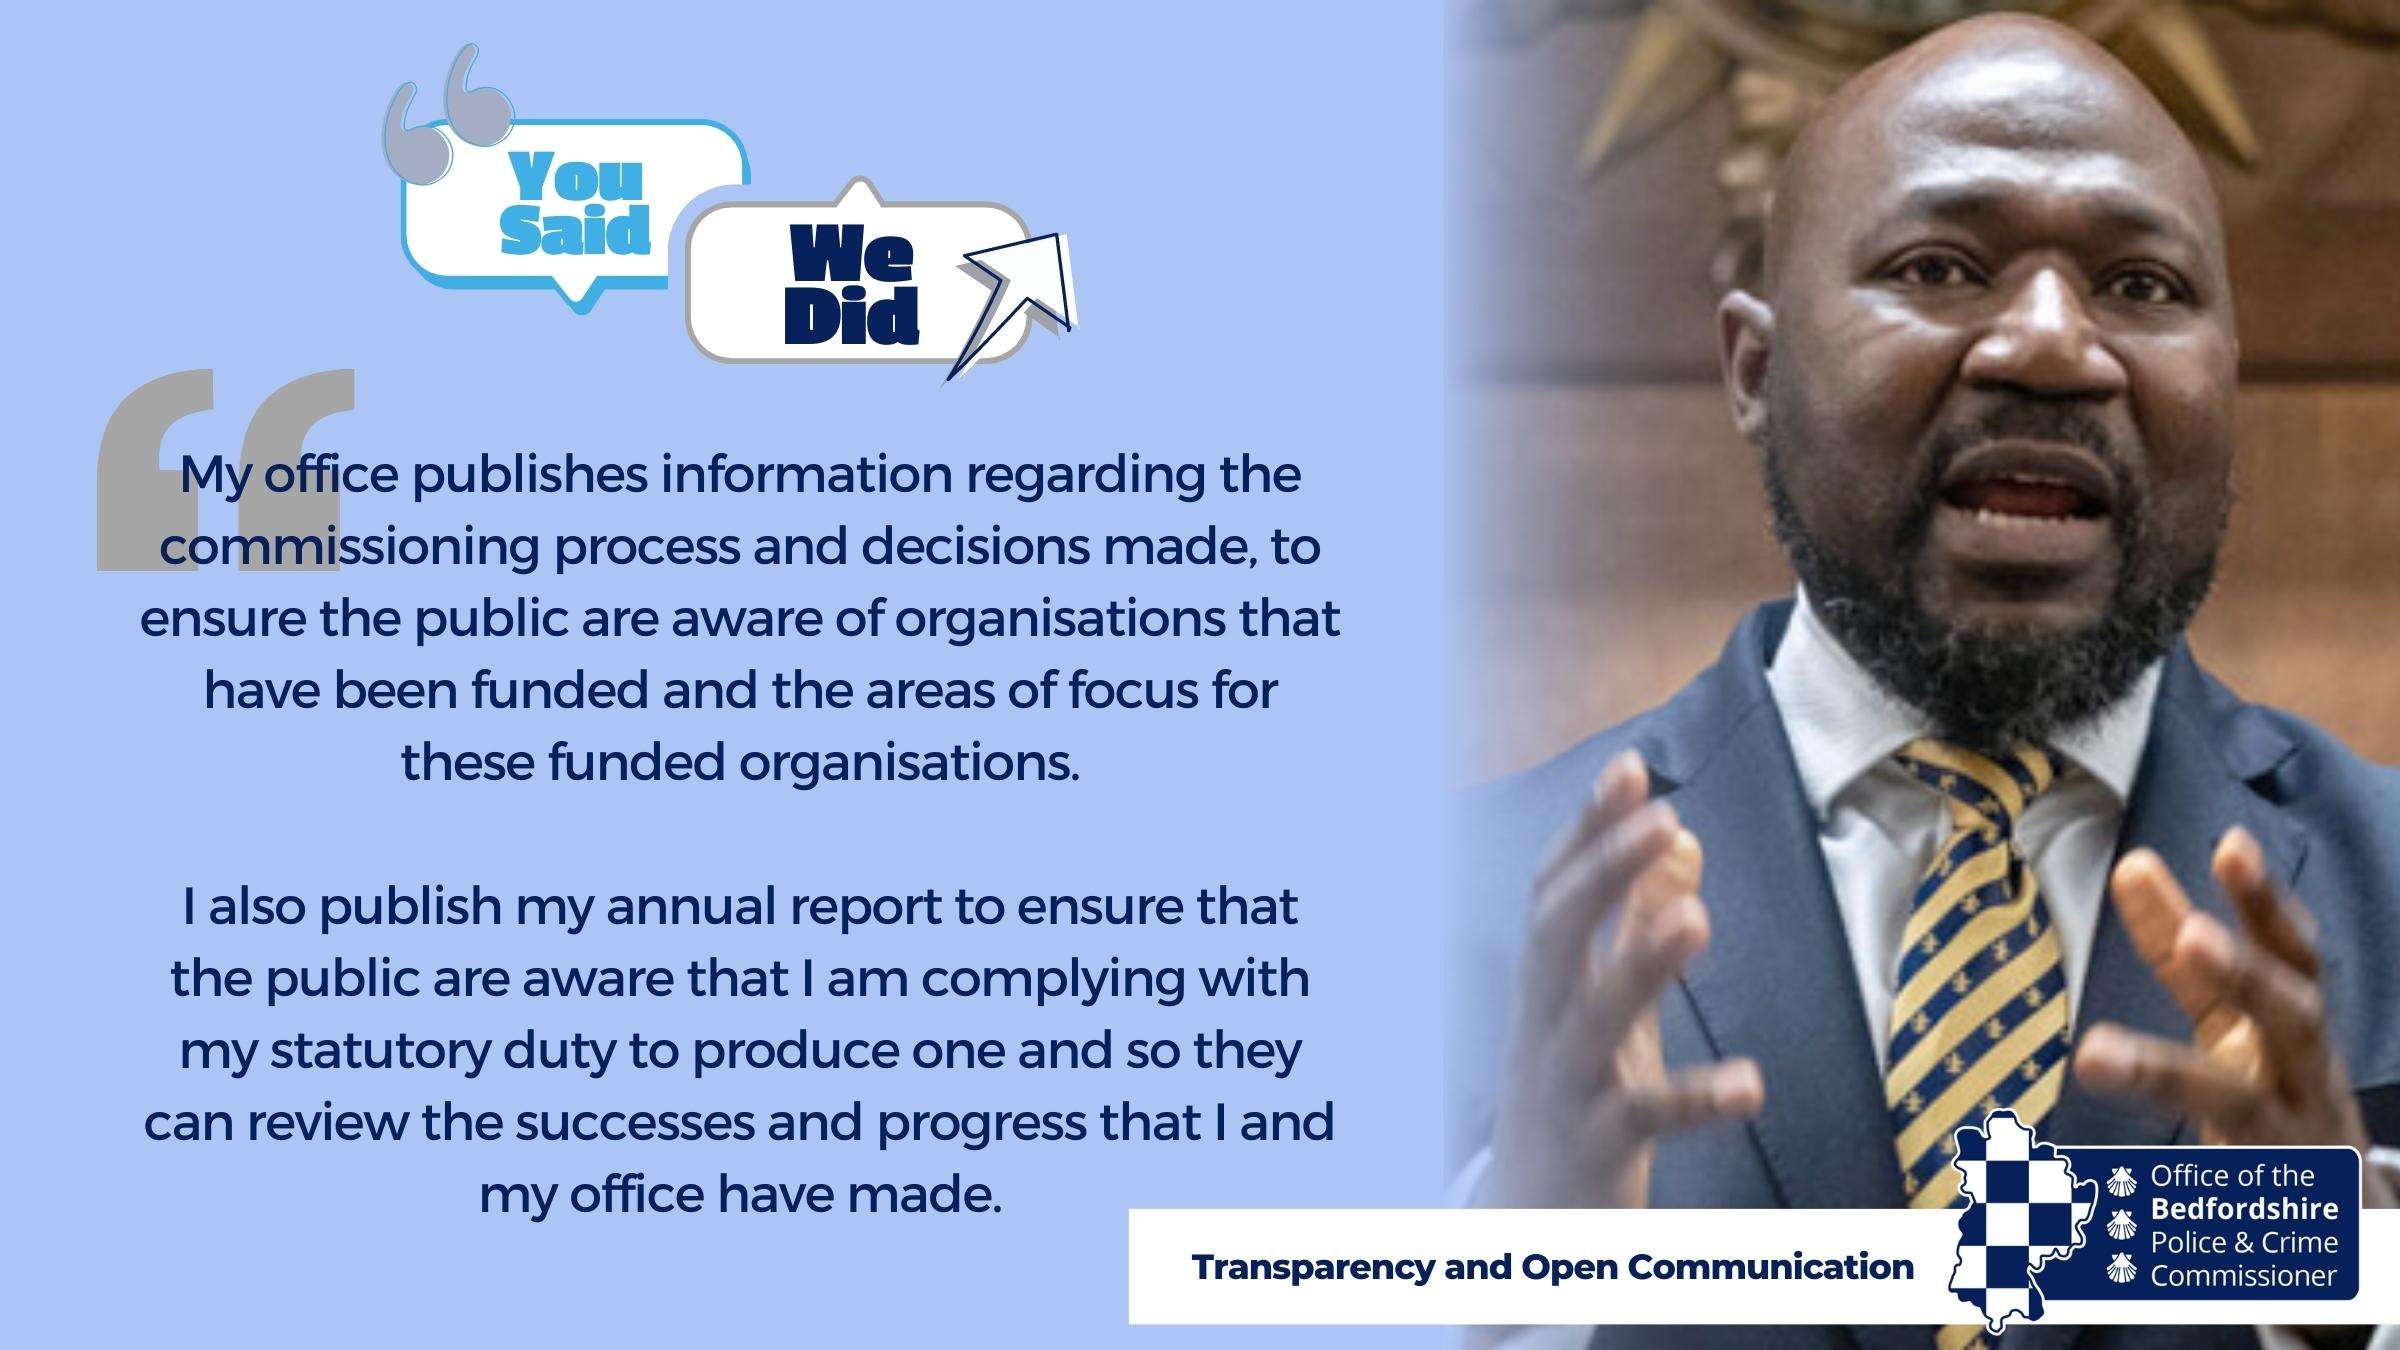 Priority 6, Transparency and open communication